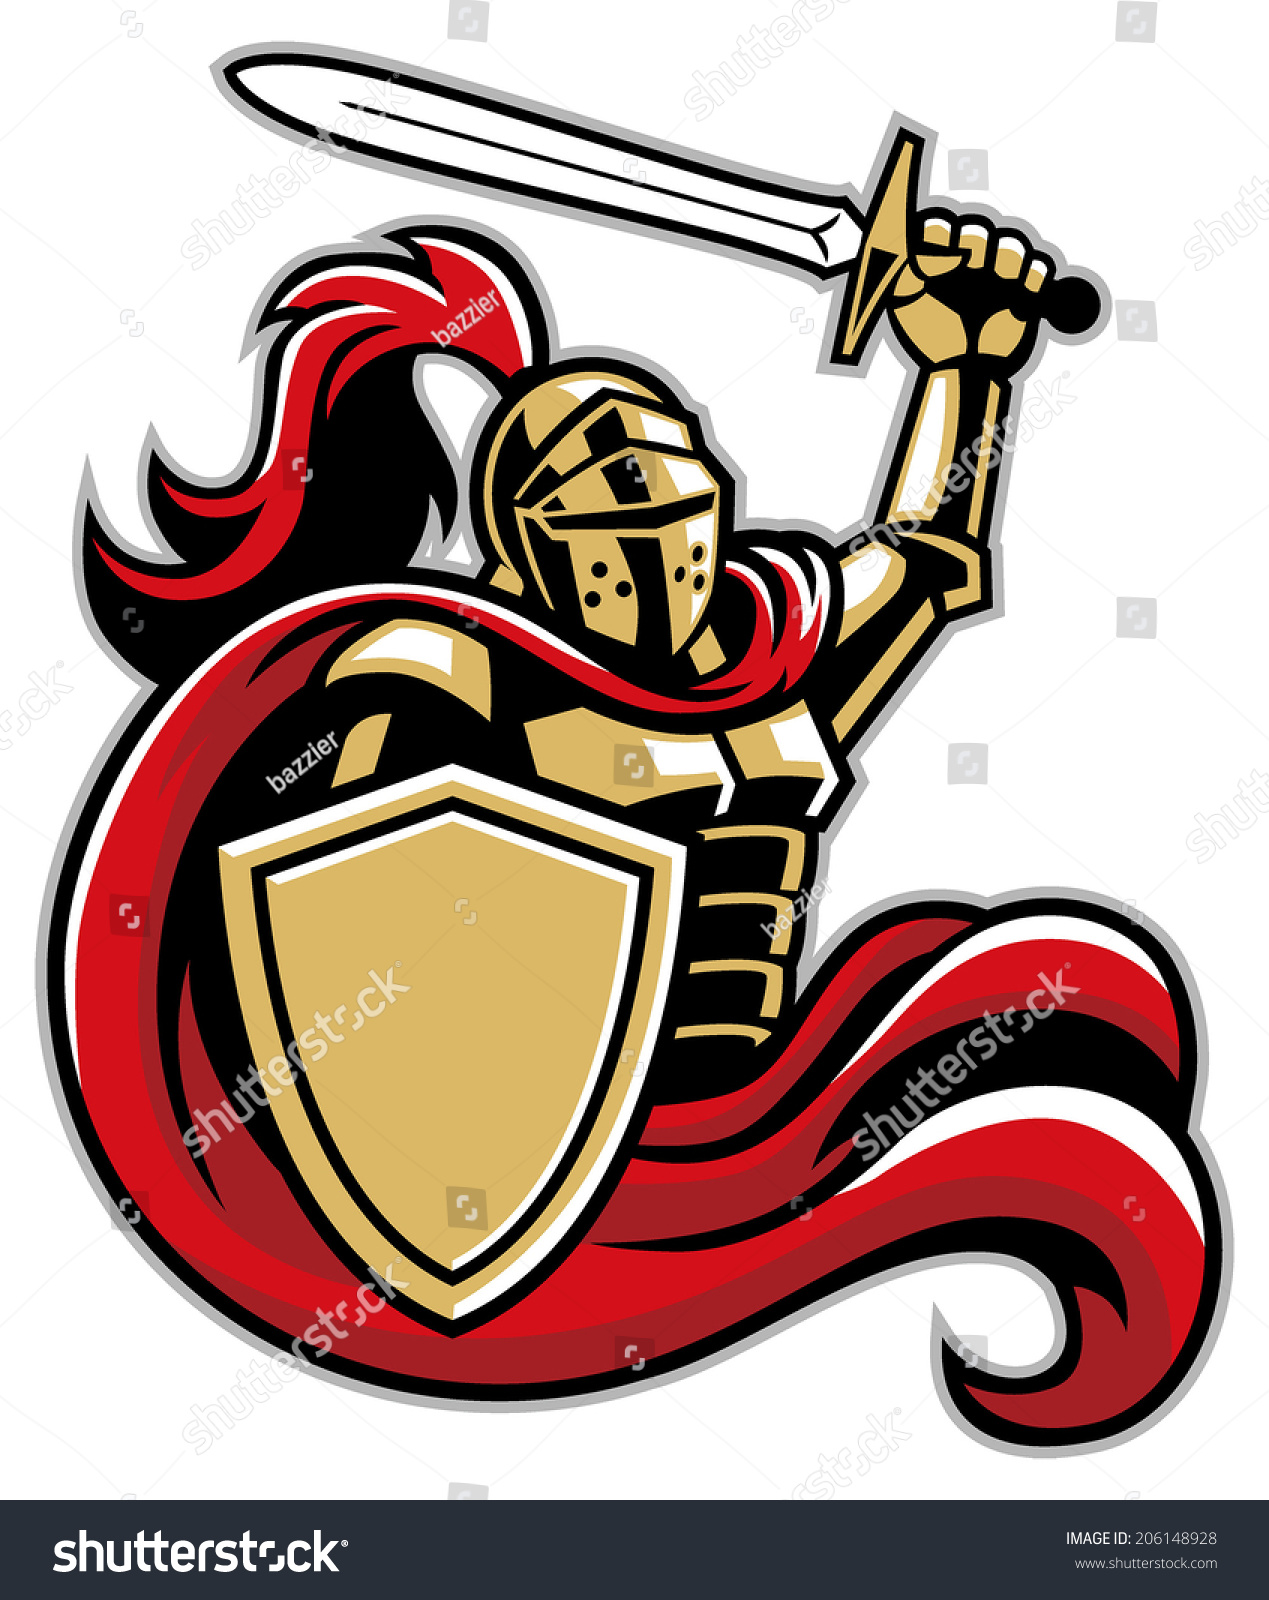 Edit Vectors Free Online - knight with shield | Shutterstock Editor